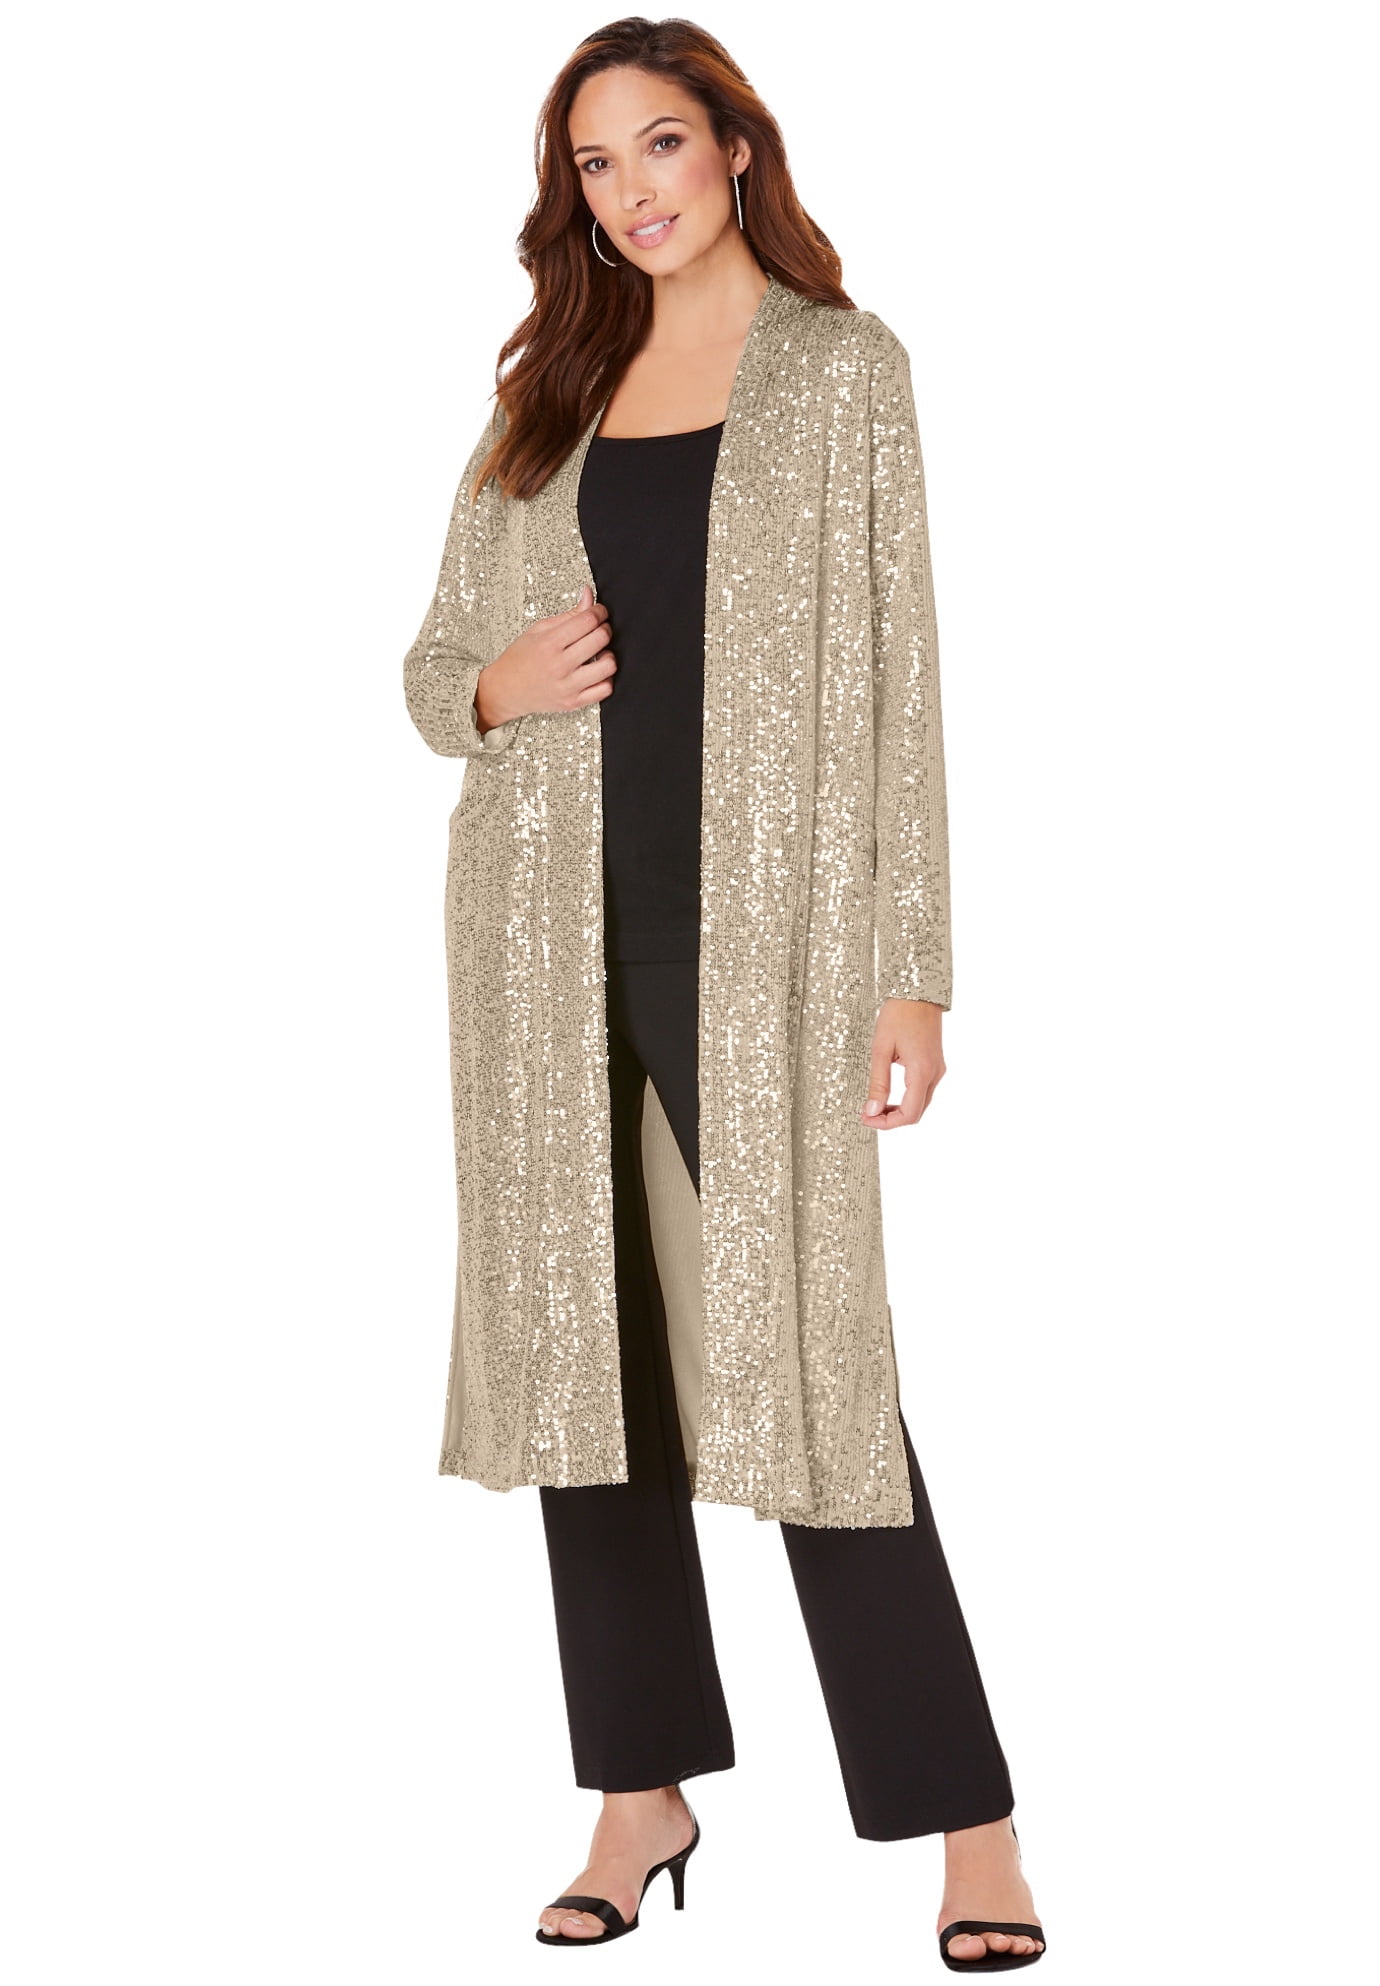 Sequin Dusters  Sequin duster, Duster jacket, Dusters